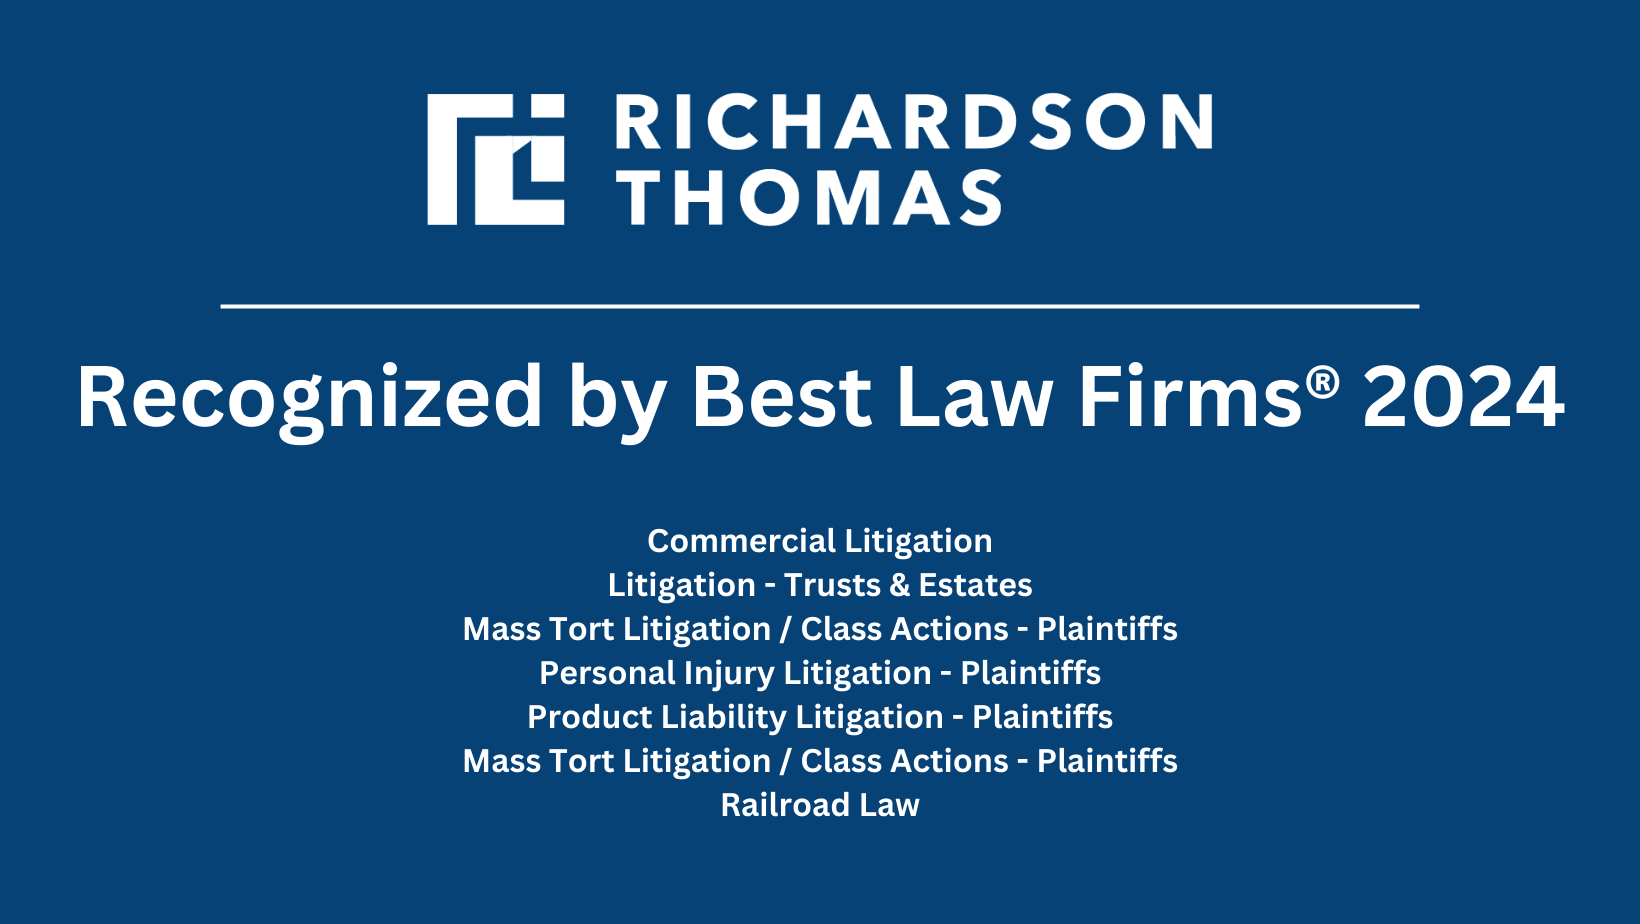 Richardson Thomas recognized in “Best Law Firms”